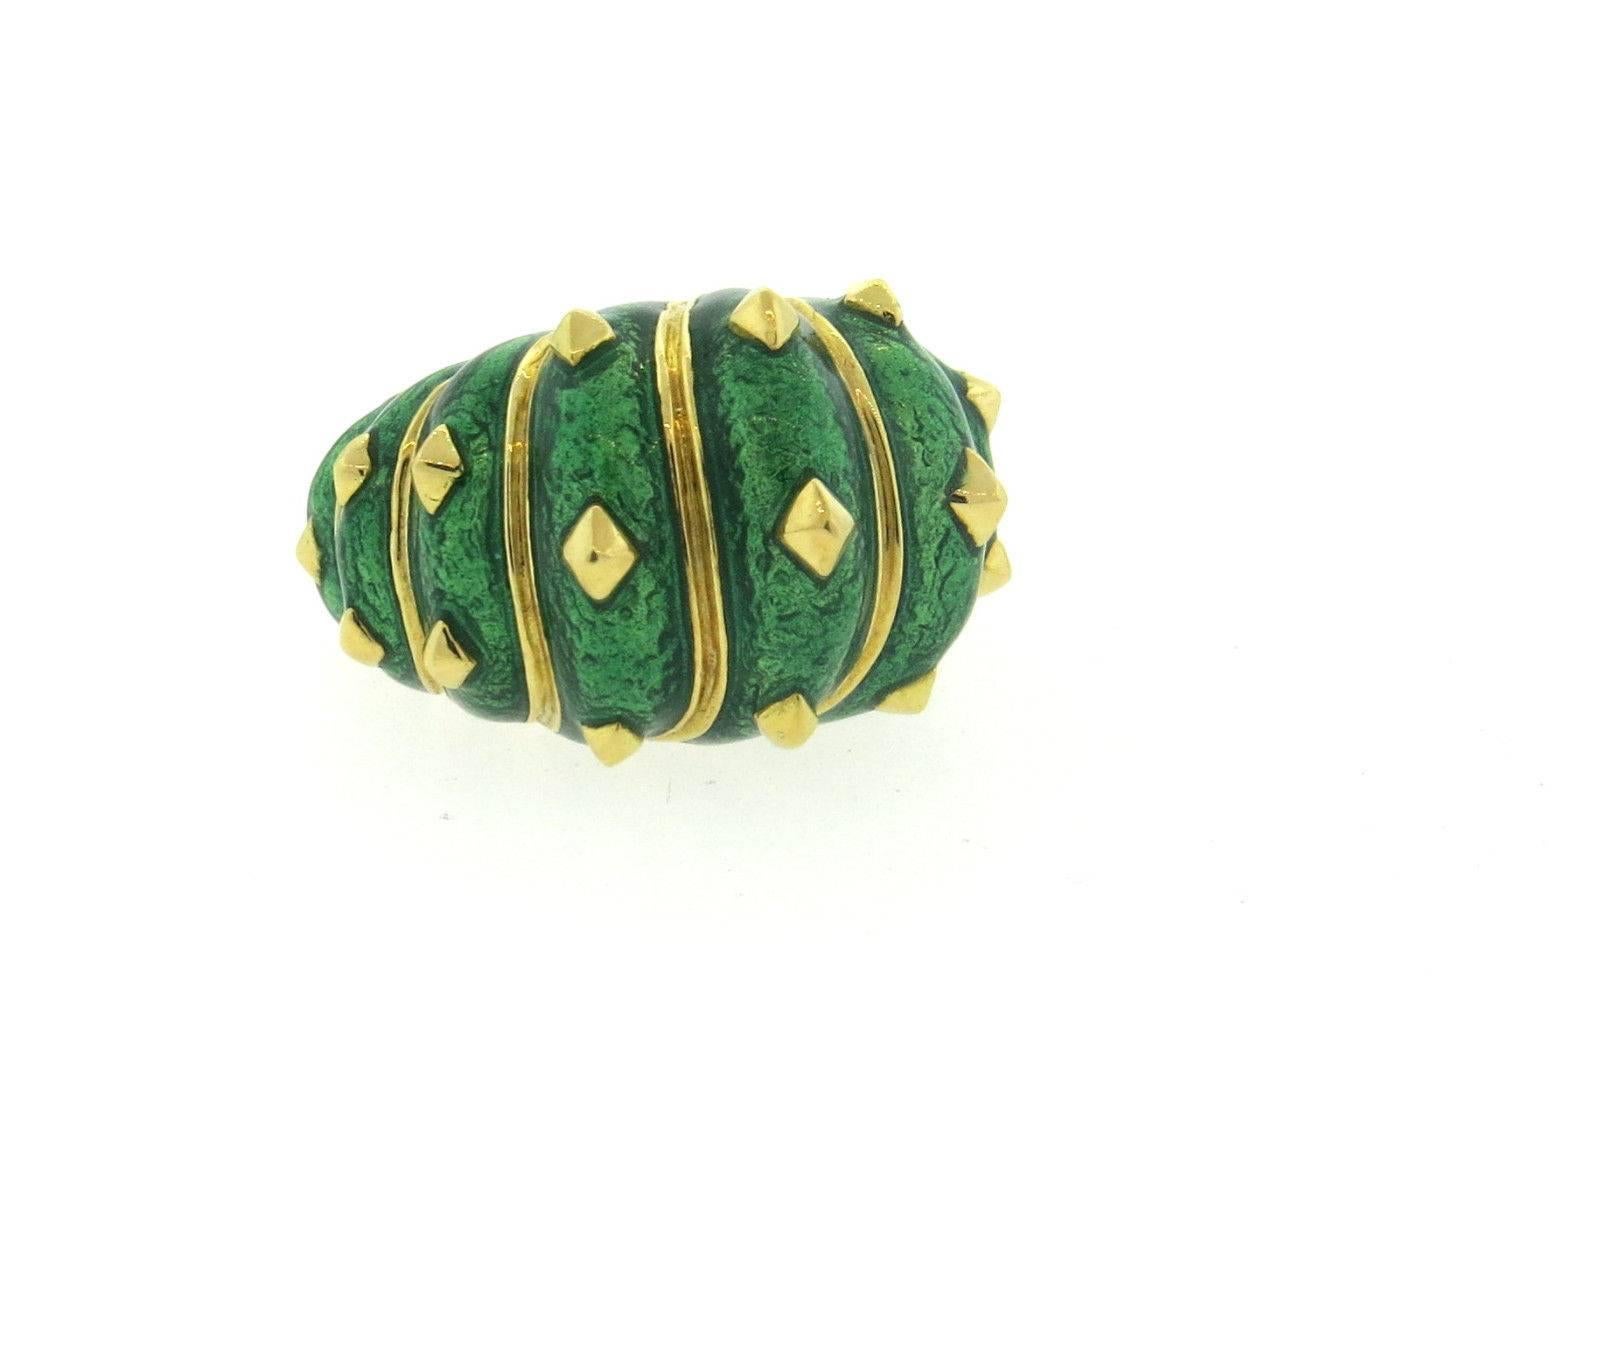 An 18k yellow gold ring adorned with green enamel.  Crafted by David Webb, the ring is a size 6 1/2, ring top is 17mm wide and sits approx. 15mm from the finger. Marked: Webb 18k.  The weight of the piece is 25.1 grams.